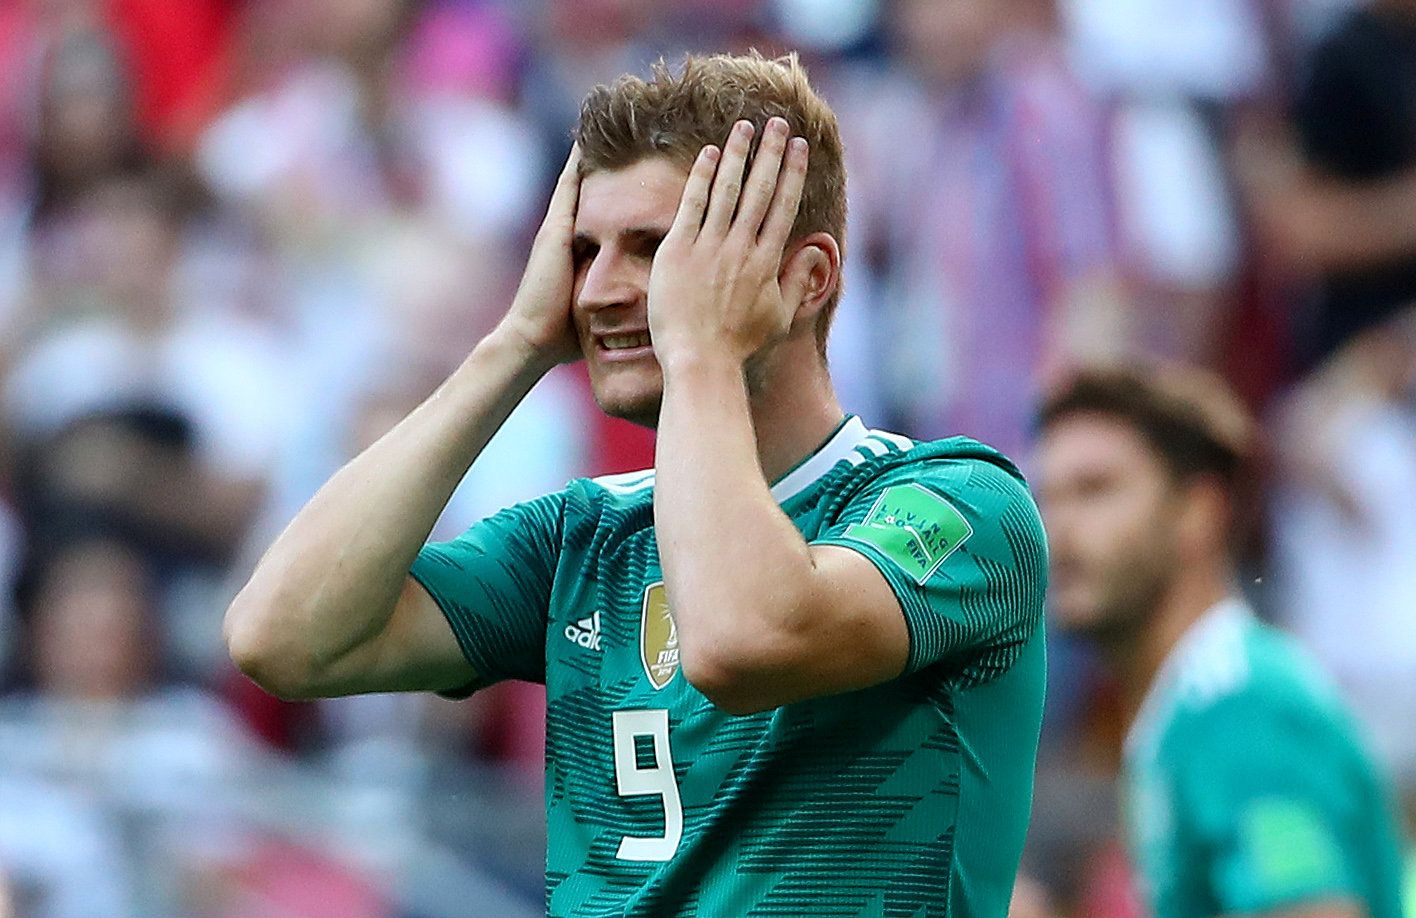 Soccer Football - World Cup - Group F - South Korea vs Germany - Kazan Arena, Kazan, Russia - June 27, 2018   Germany's Timo Werner reacts after a chance   REUTERS/Michael Dalder